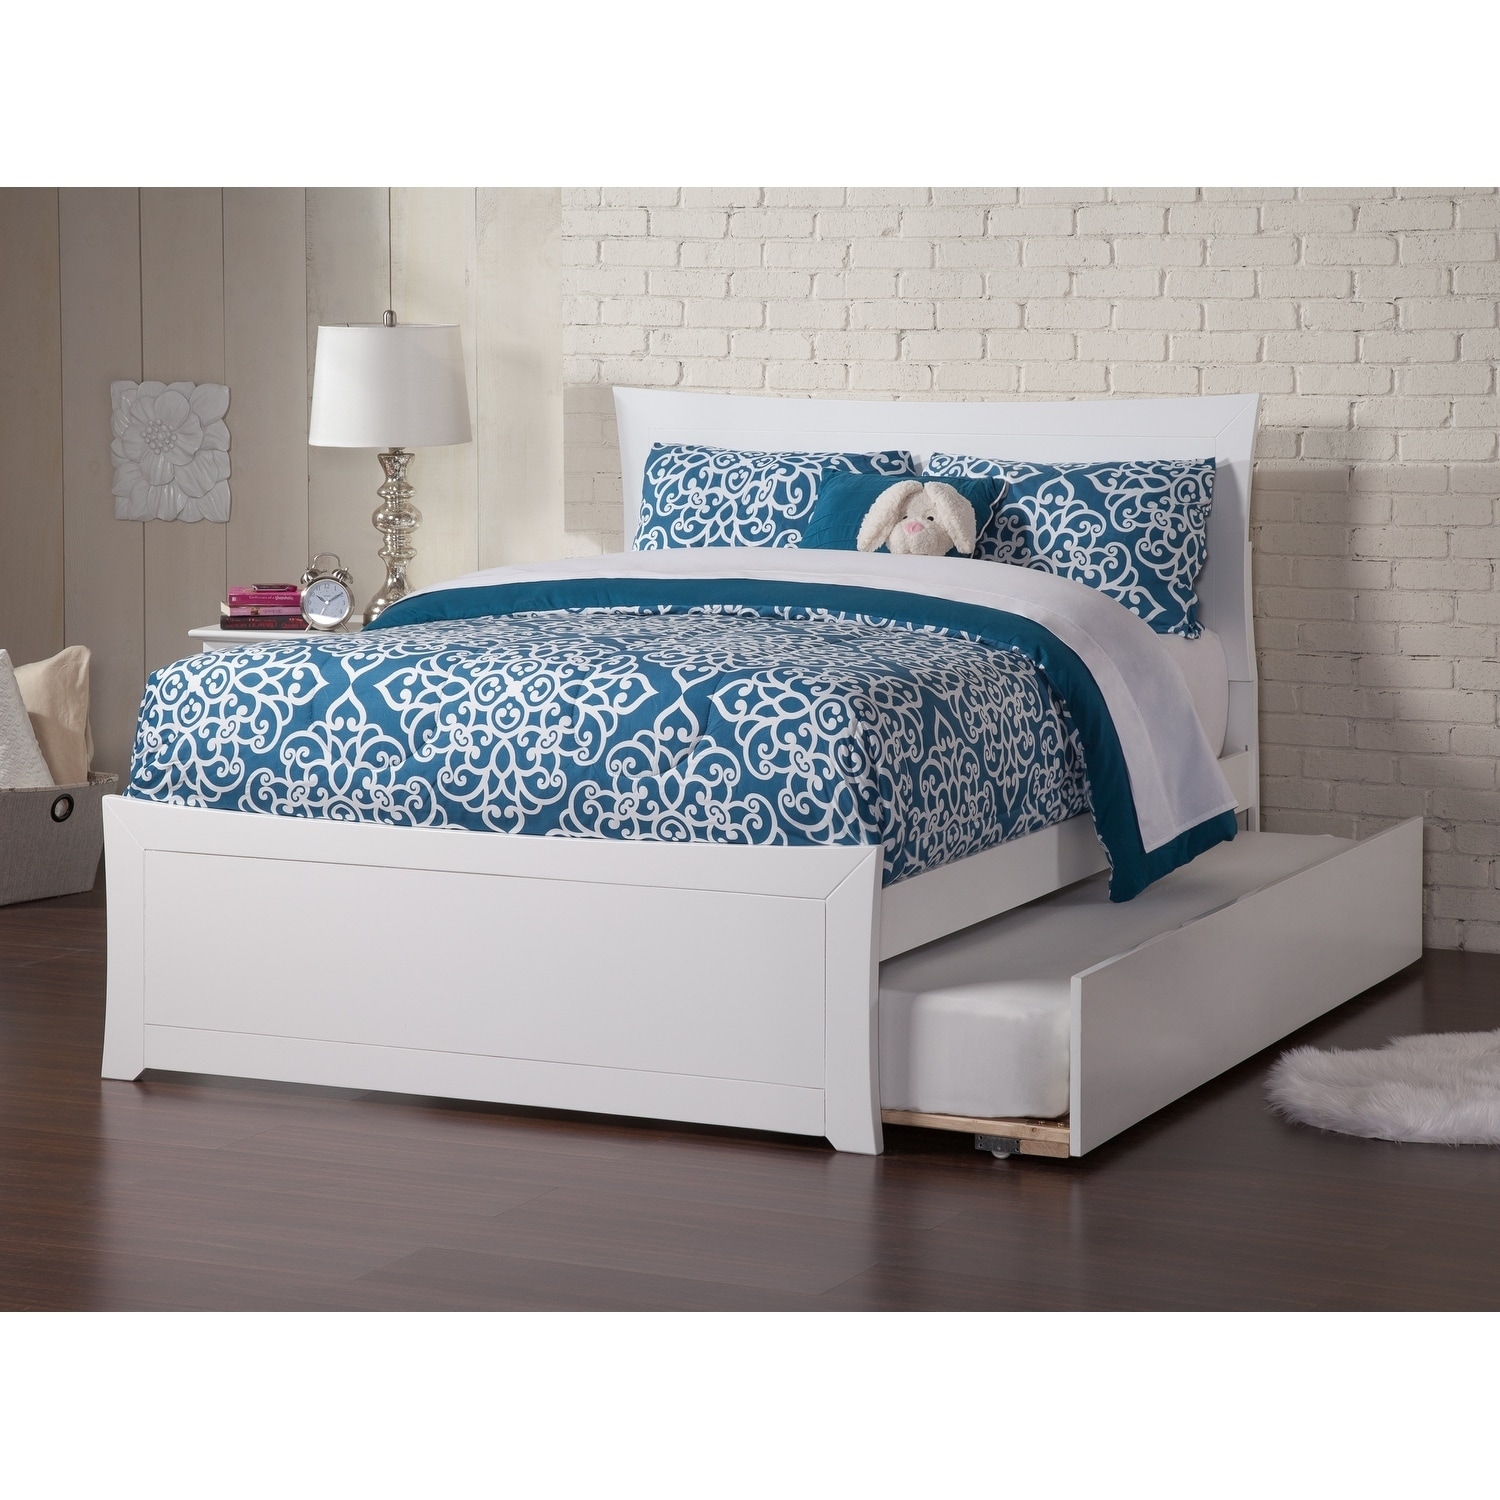 white full bed with trundle